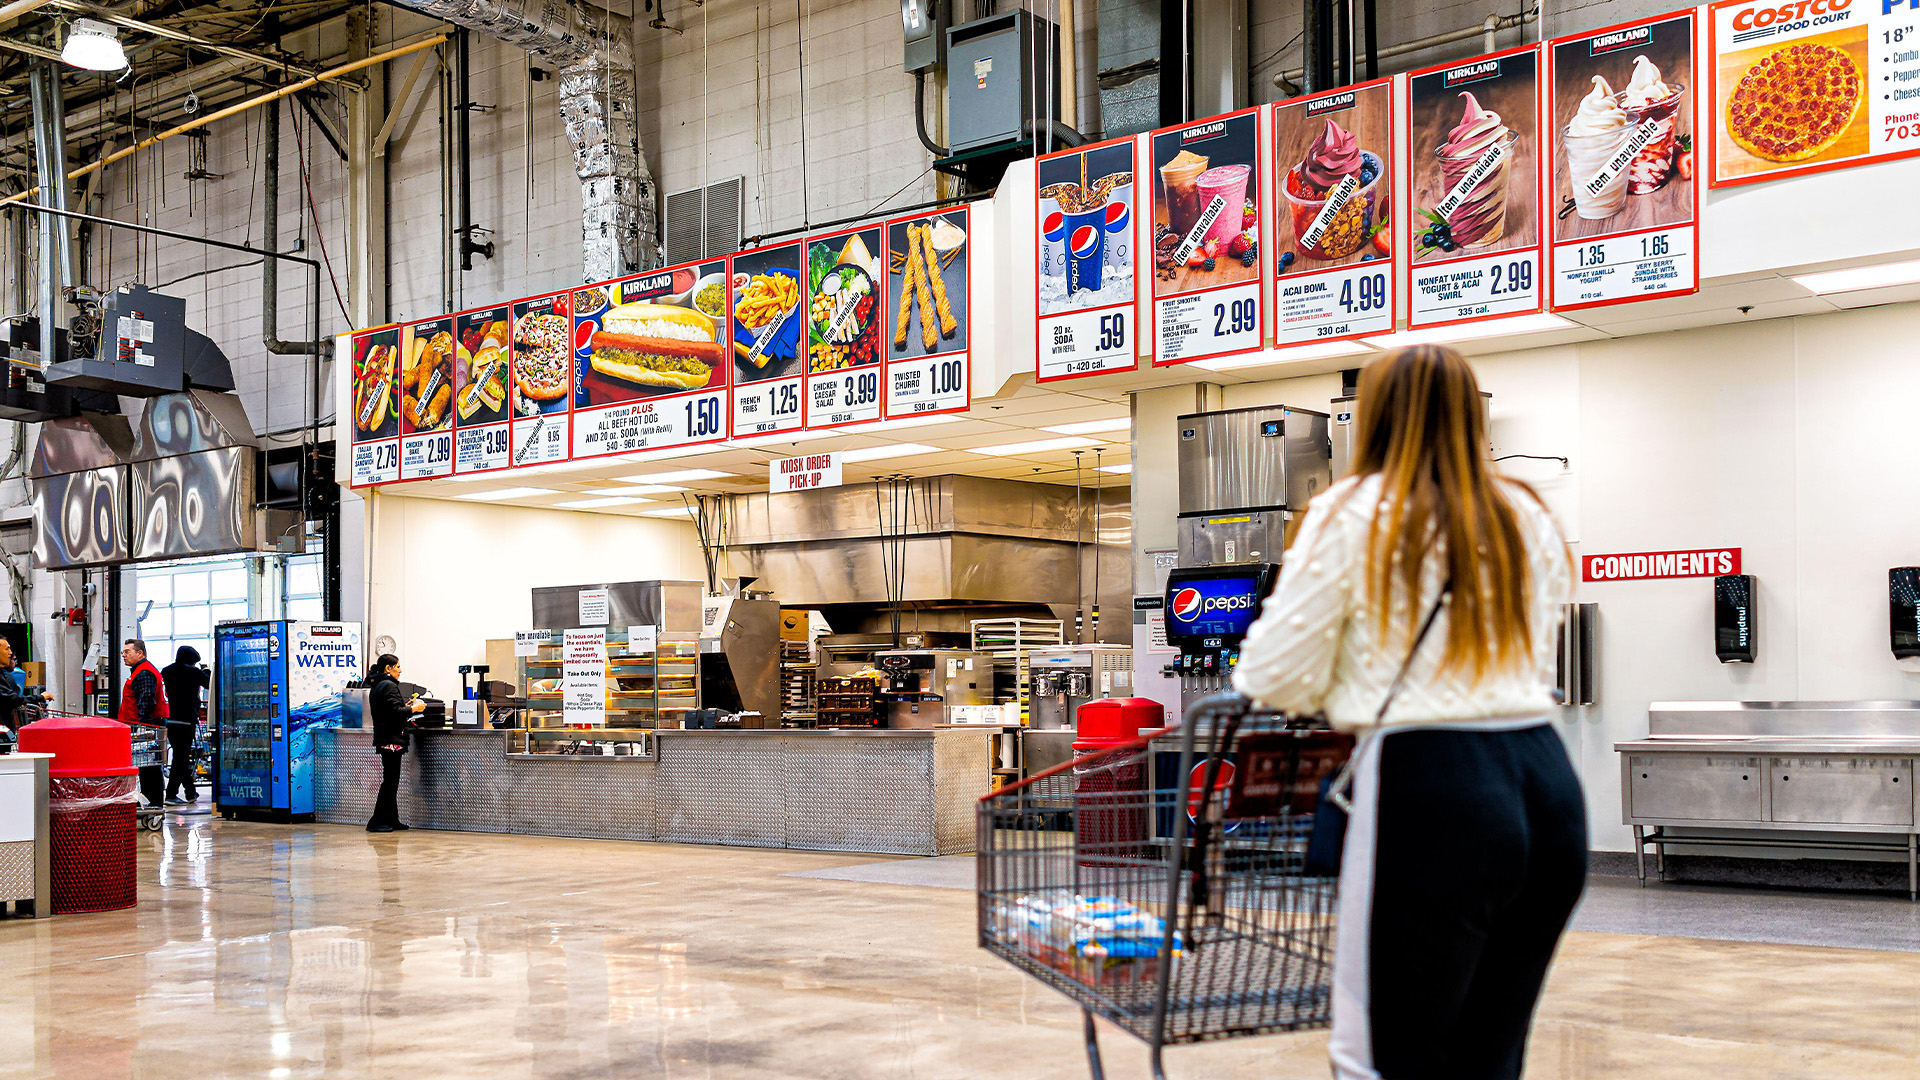 Costco’s members-only food court change to take effect in just days and fans are calling the move ‘crazy’ [Video]